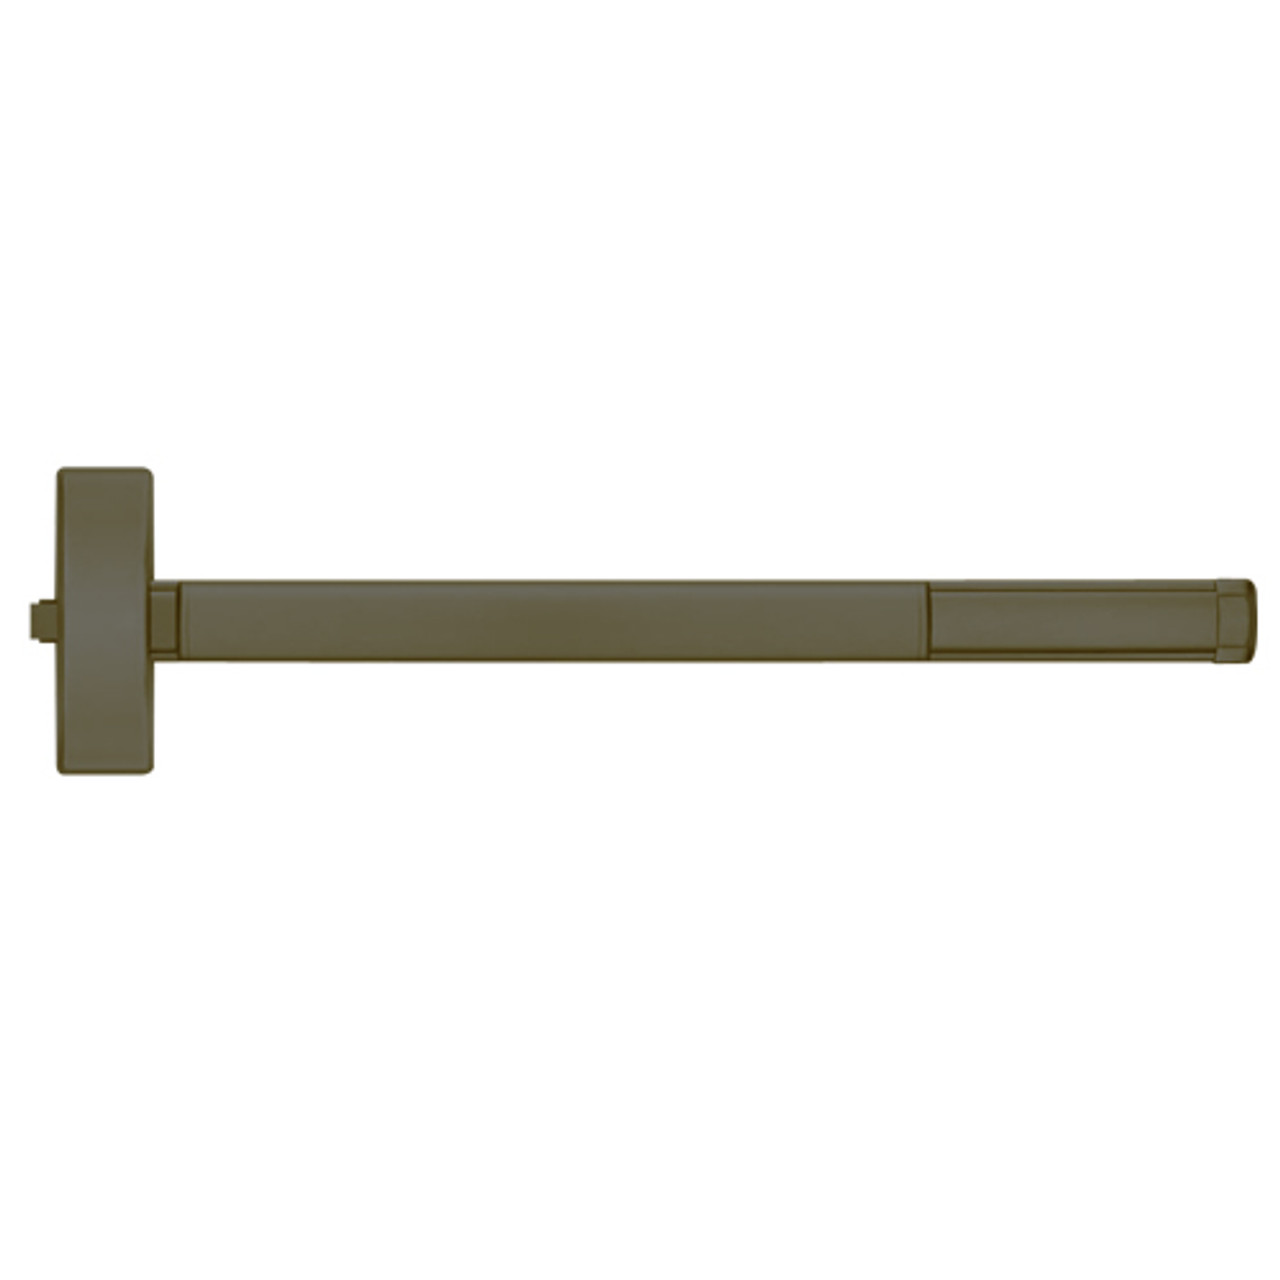 ELR2115-613-36 PHI 2100 Series Non Fire Rated Apex Rim Exit Device with Electric Latch Retraction Prepped for Thumb Piece Always Active in Oil Rubbed Bronze Finish